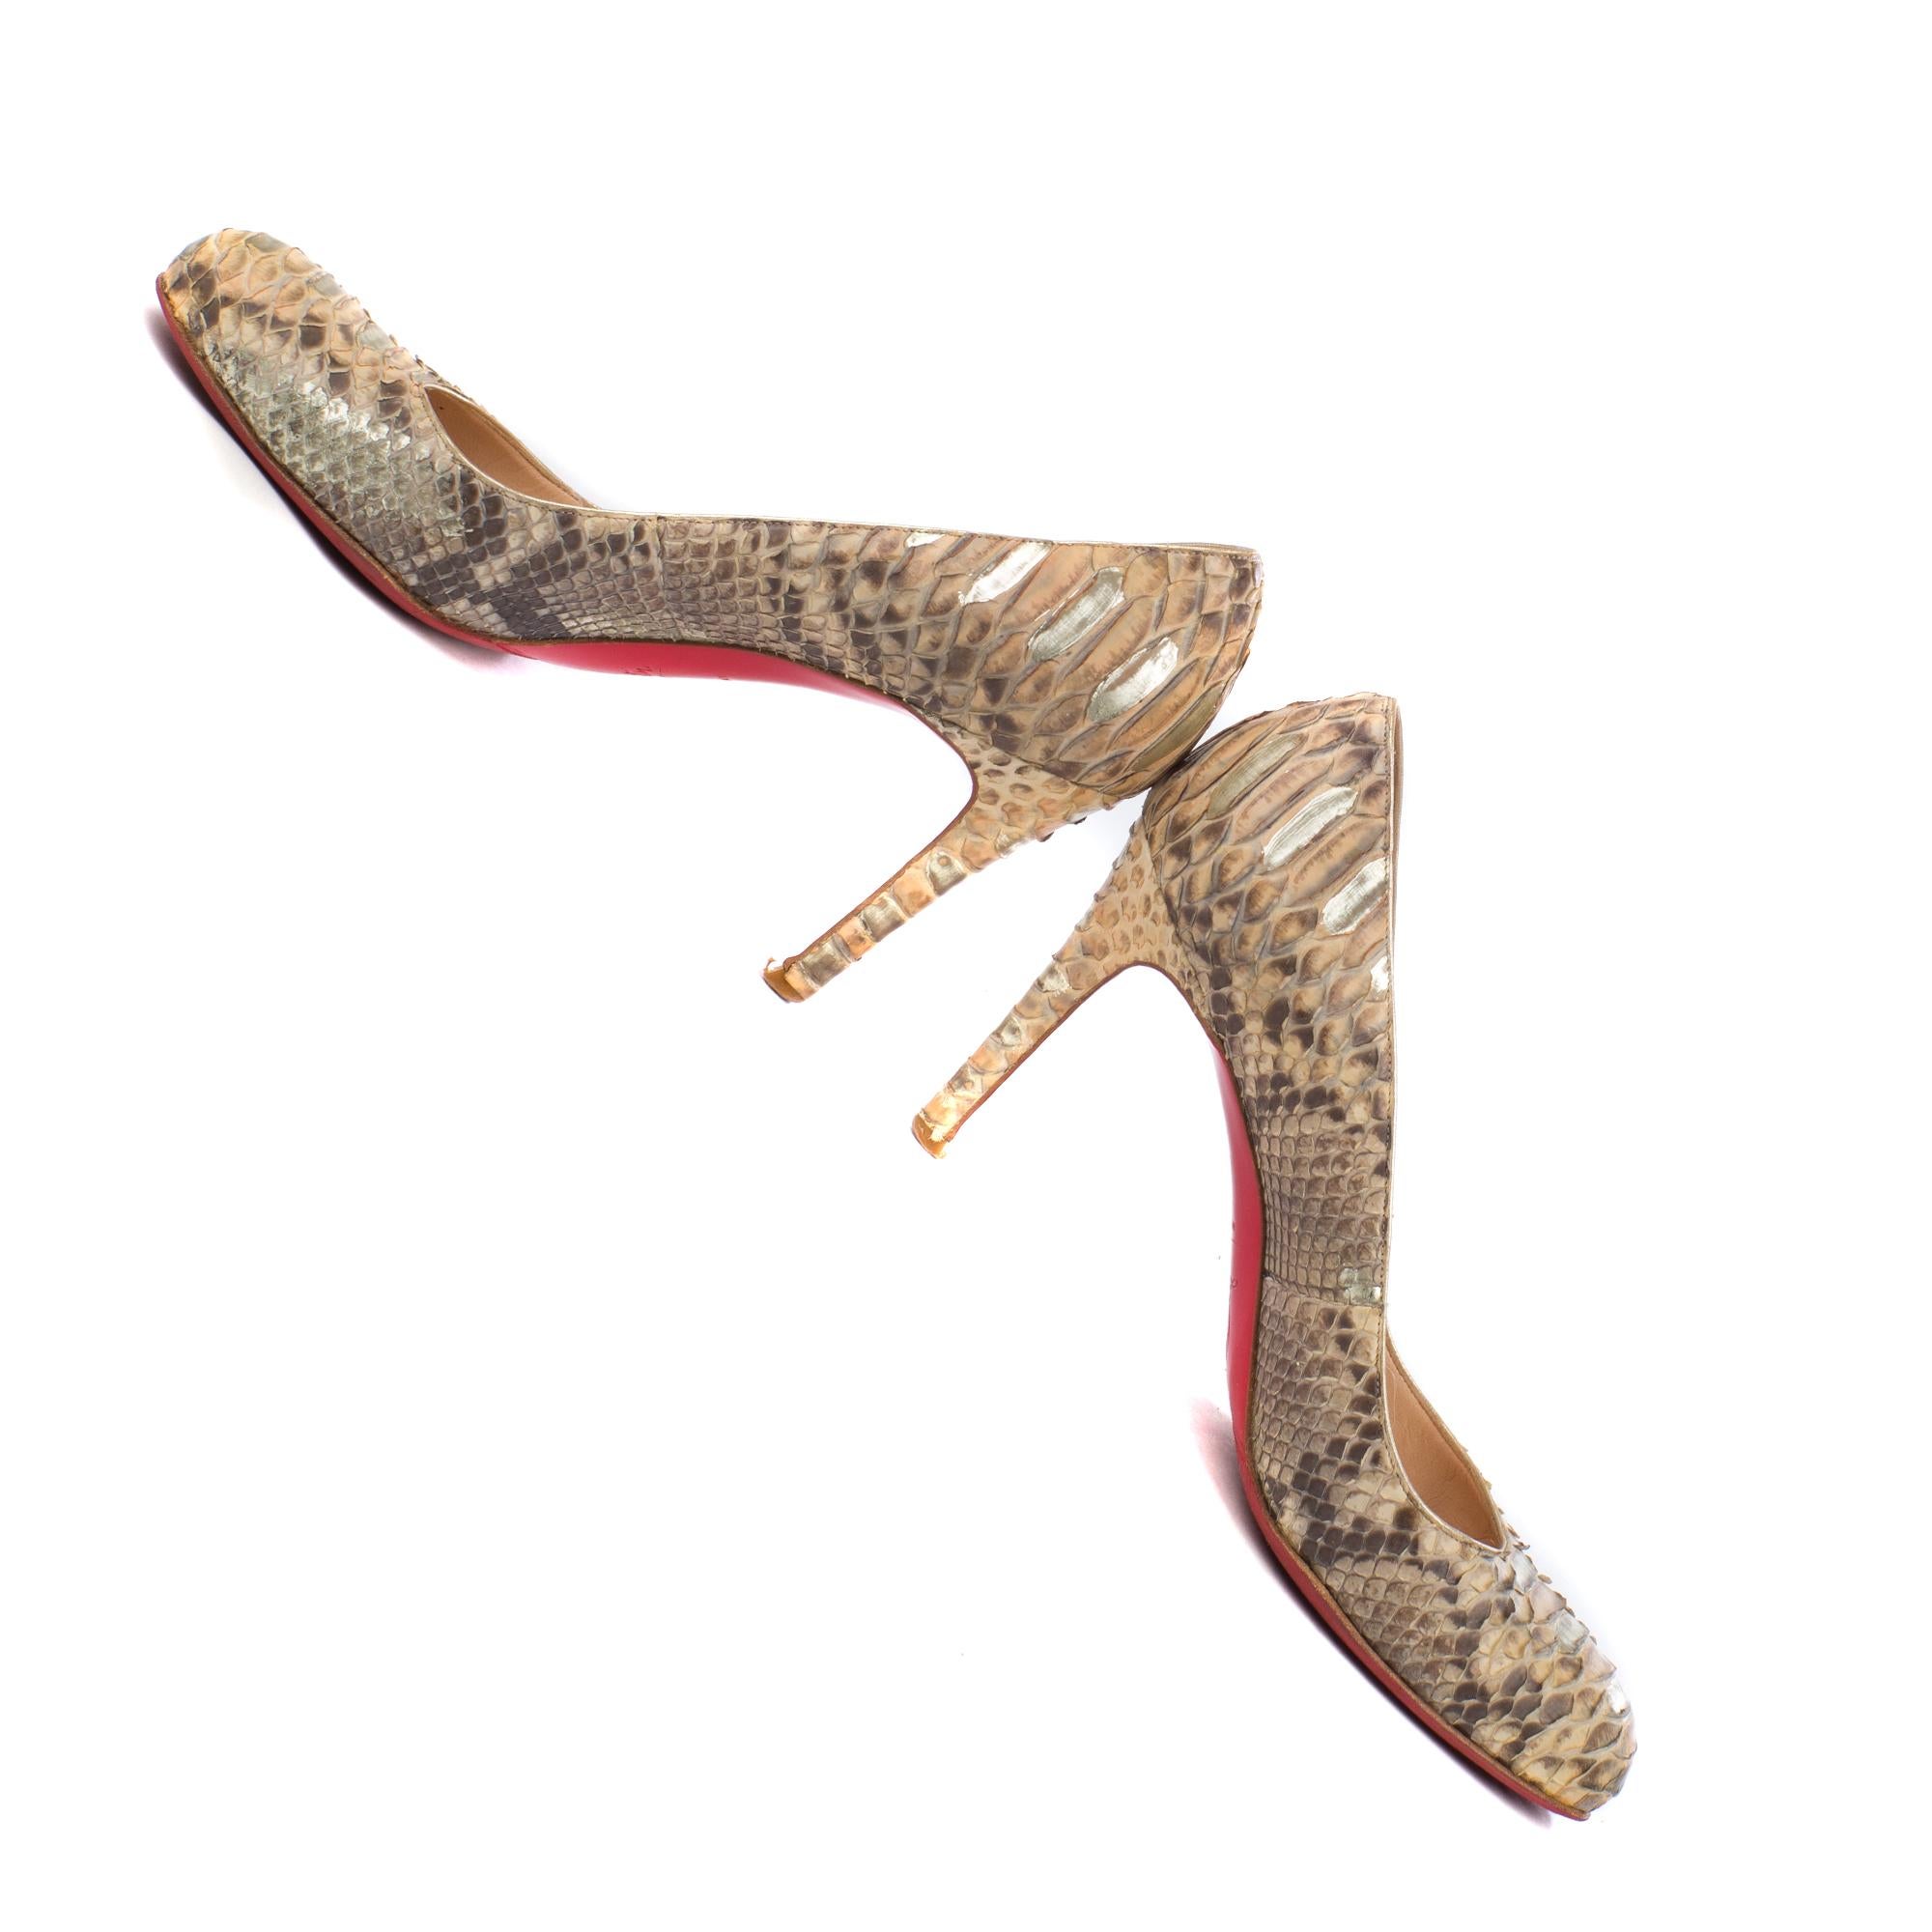 CHRISTIAN LOUBOUTIN. FIFI pumps 85 mm in python, golden and gray reflections.
 Size 37.
 good condition, resemellés.